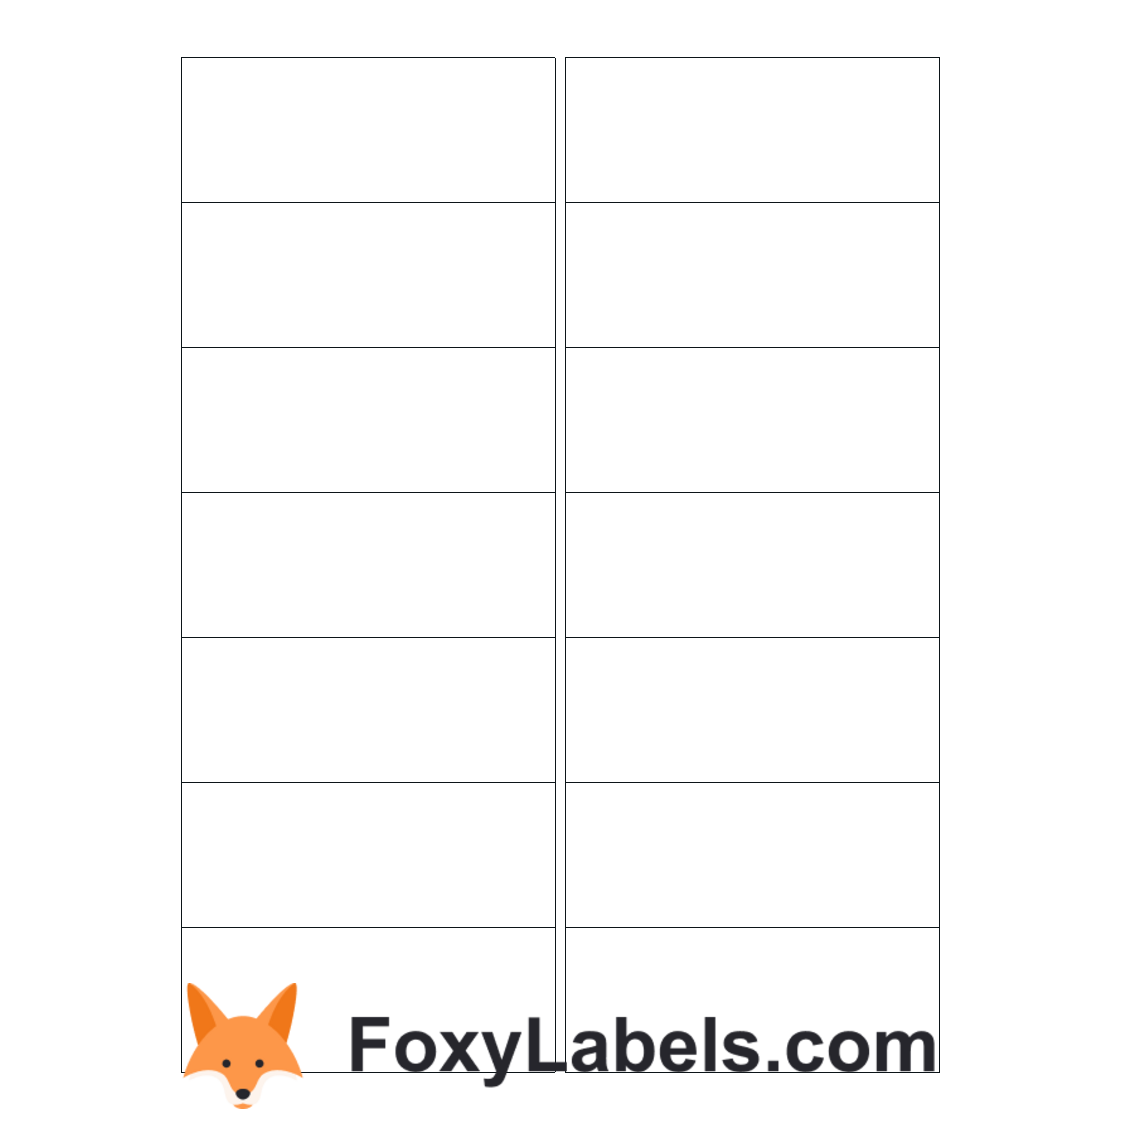 Avery L7563 label template for Google Docs